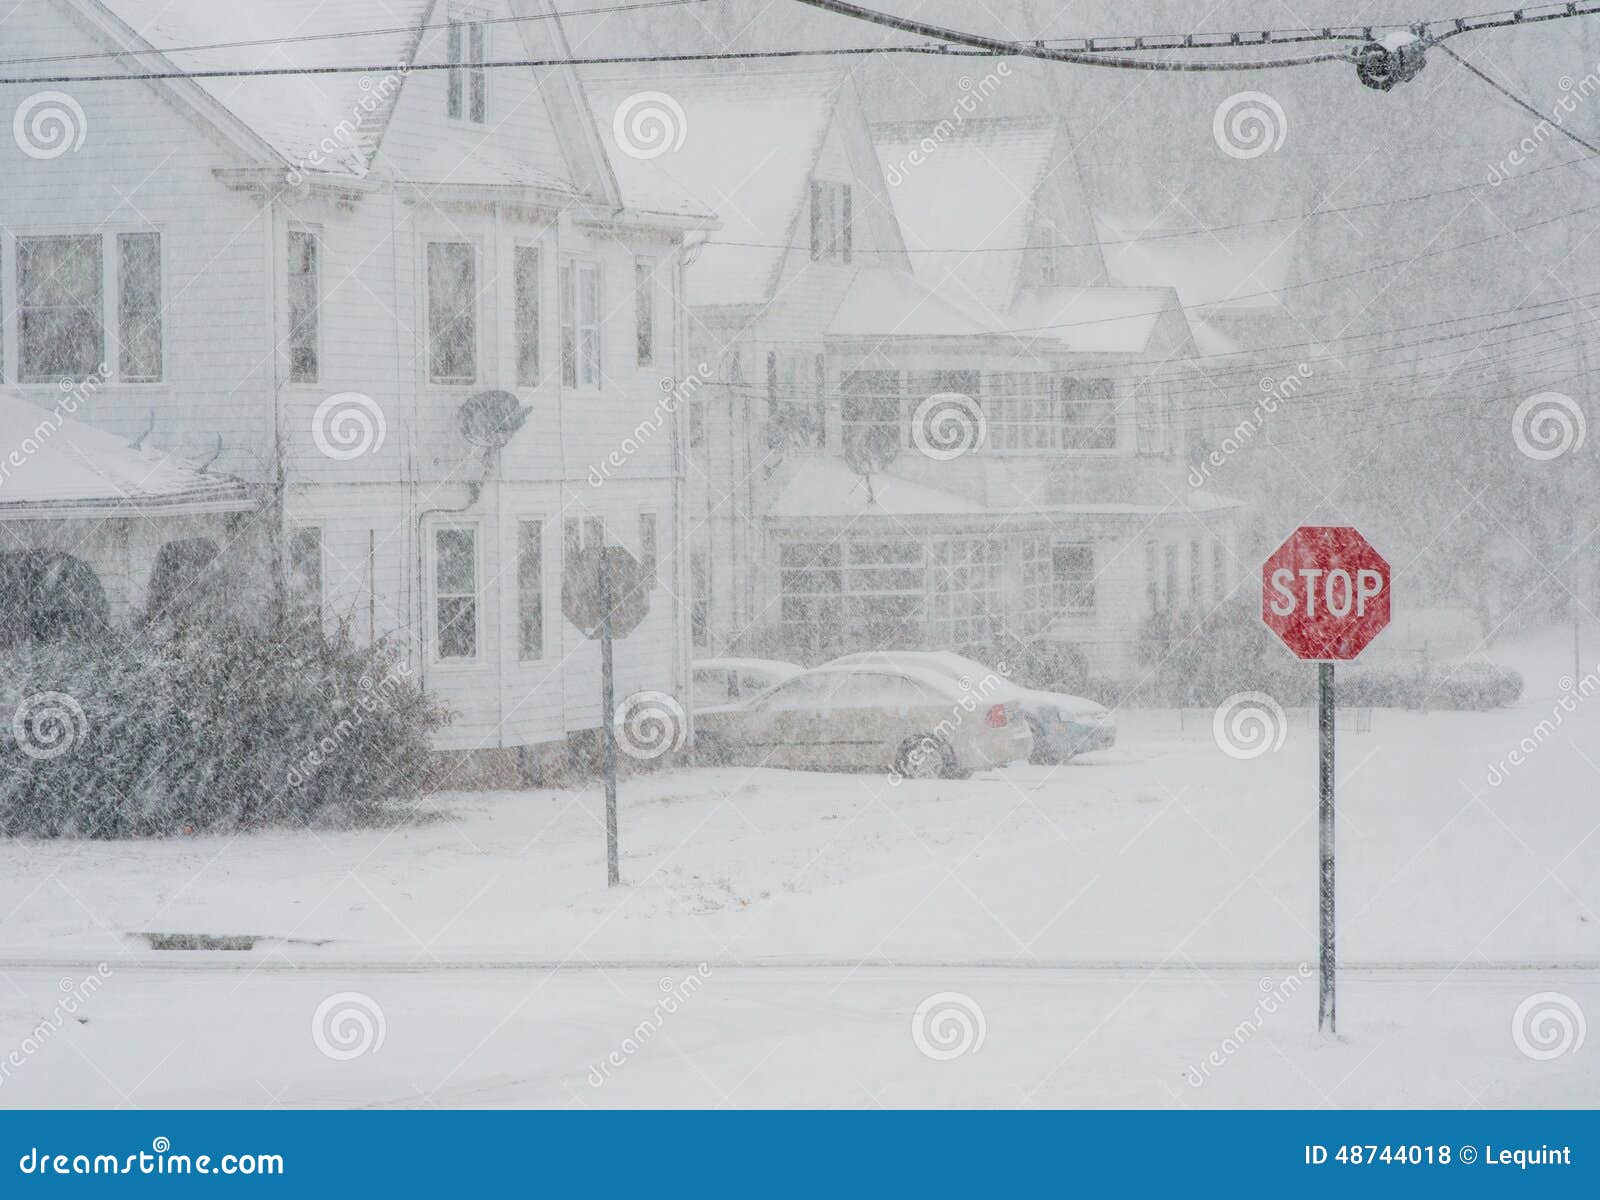 Please stop snowing stock photo. Image of freeze, please - 48744018